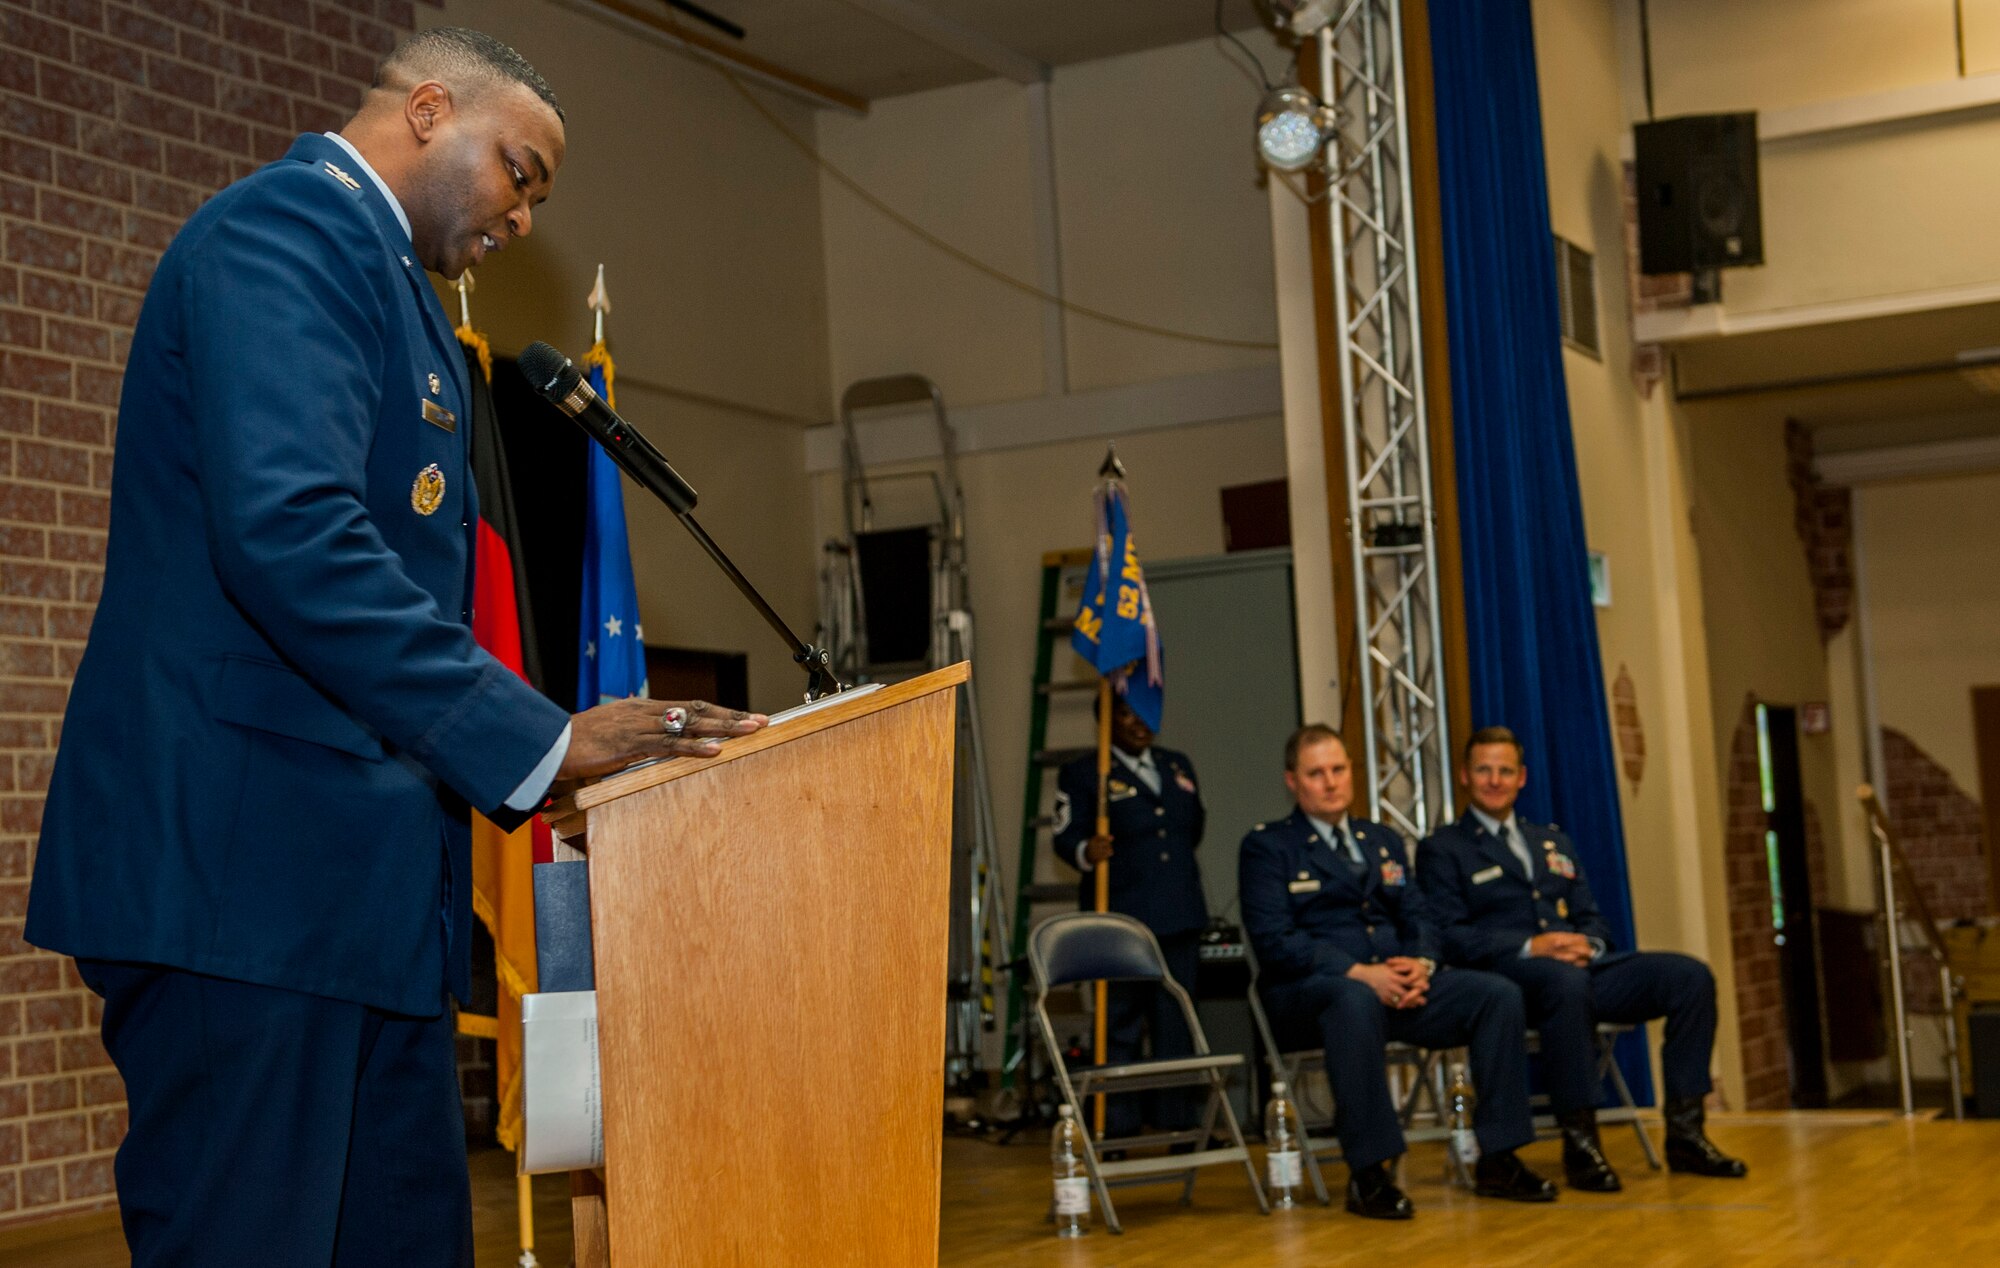 U.S. Air Force Col. Alfred Flowers, 52nd Medical Group commander, left, speaks during the 52nd Medical Support Squadron change of command ceremony in the Brickhouse on Spangdahlem Air Base, Germany, June 30, 2016. Flowers gave a speech bidding the outgoing commander of the 52nd MDSS, U.S. Air Force Lt. Col. Wade Adair, farewell and hailing in the incoming commander, U.S. Air Force Lt. Col. Thomas Lesnick. (U.S. Air Force photo by Airman 1st Class Timothy Kim/Released)